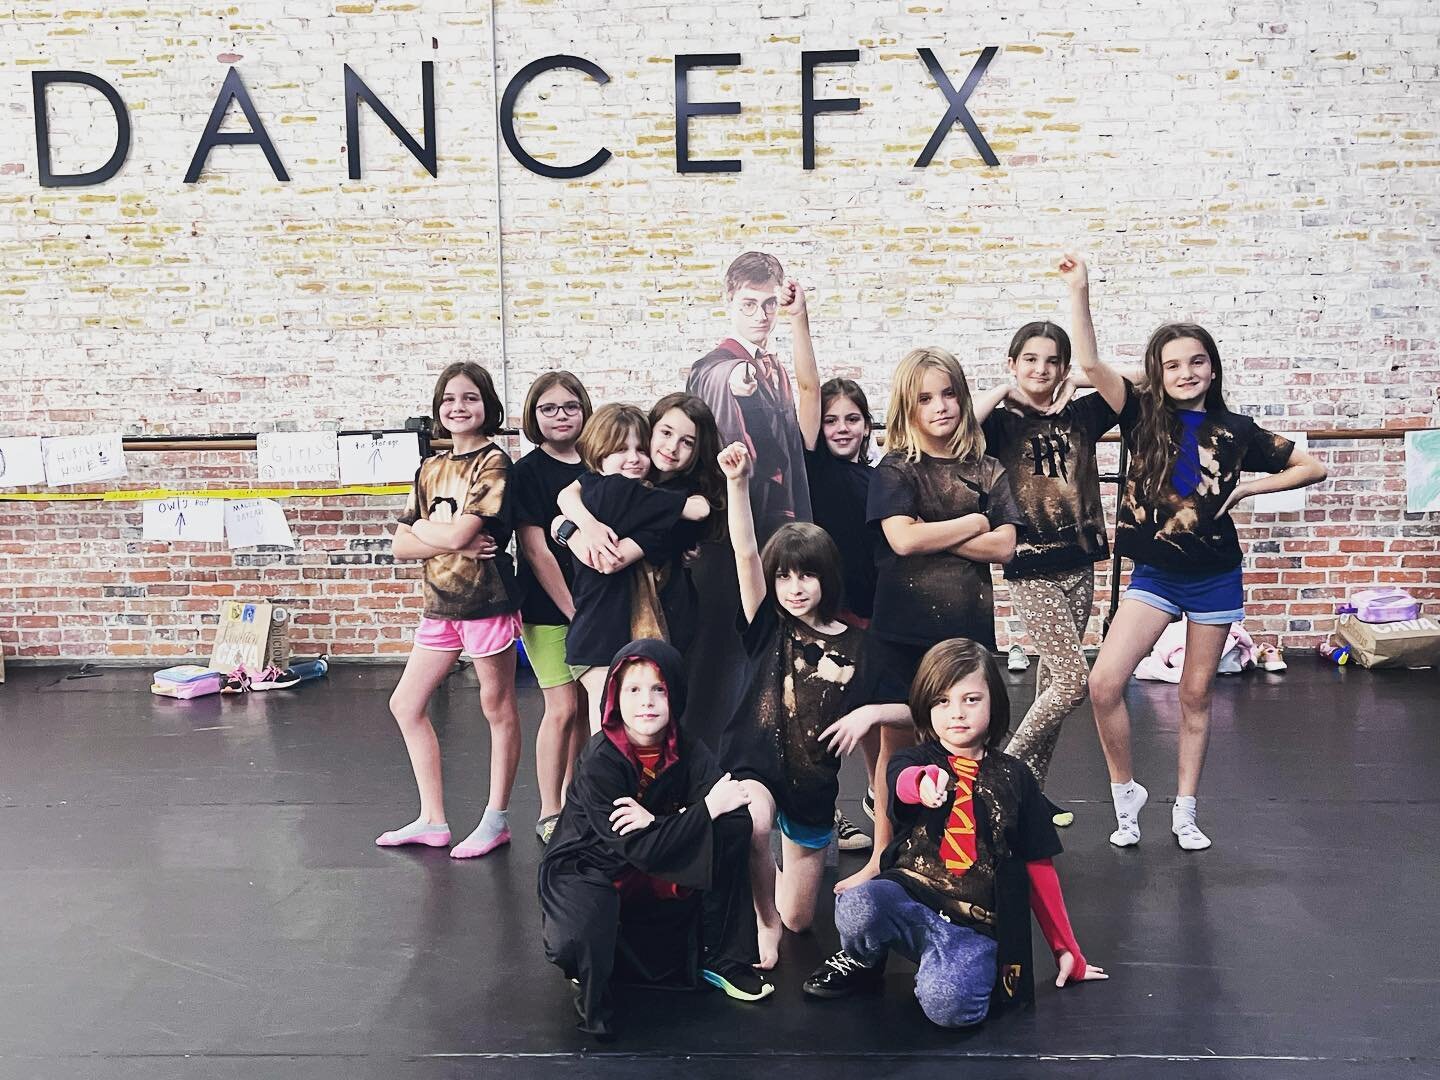 Another successful Harry Potter Camp in the books! Thank you Mrs Catherine for making last week so magical! To view our summer camp schedule, go to www.dancefx.org